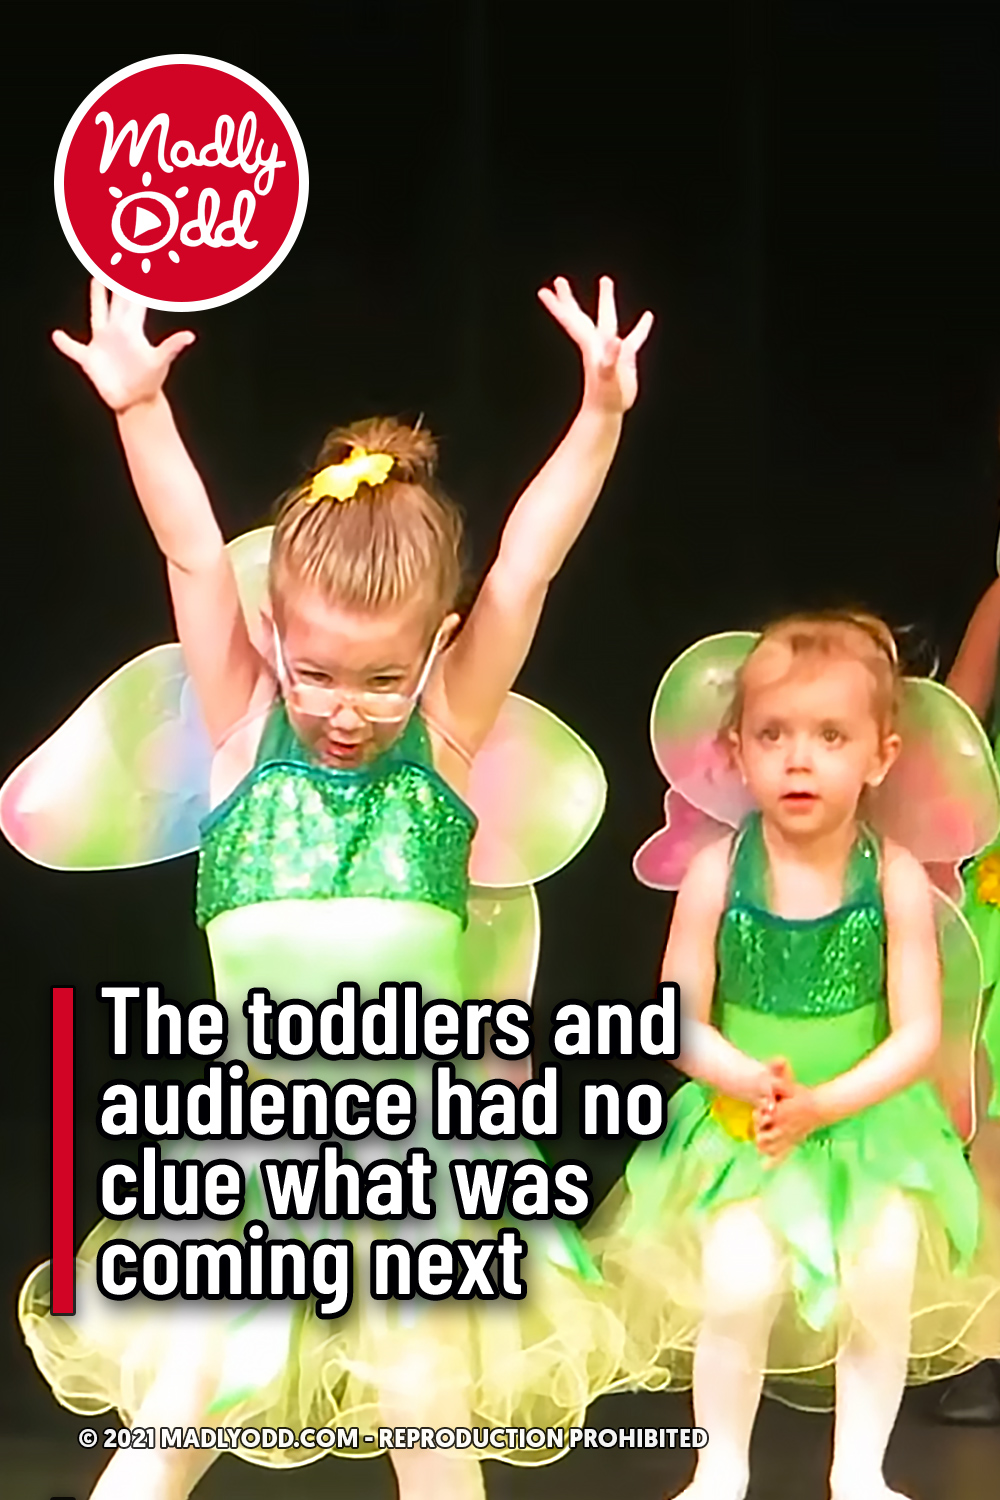 The toddlers and audience had no clue what was coming next